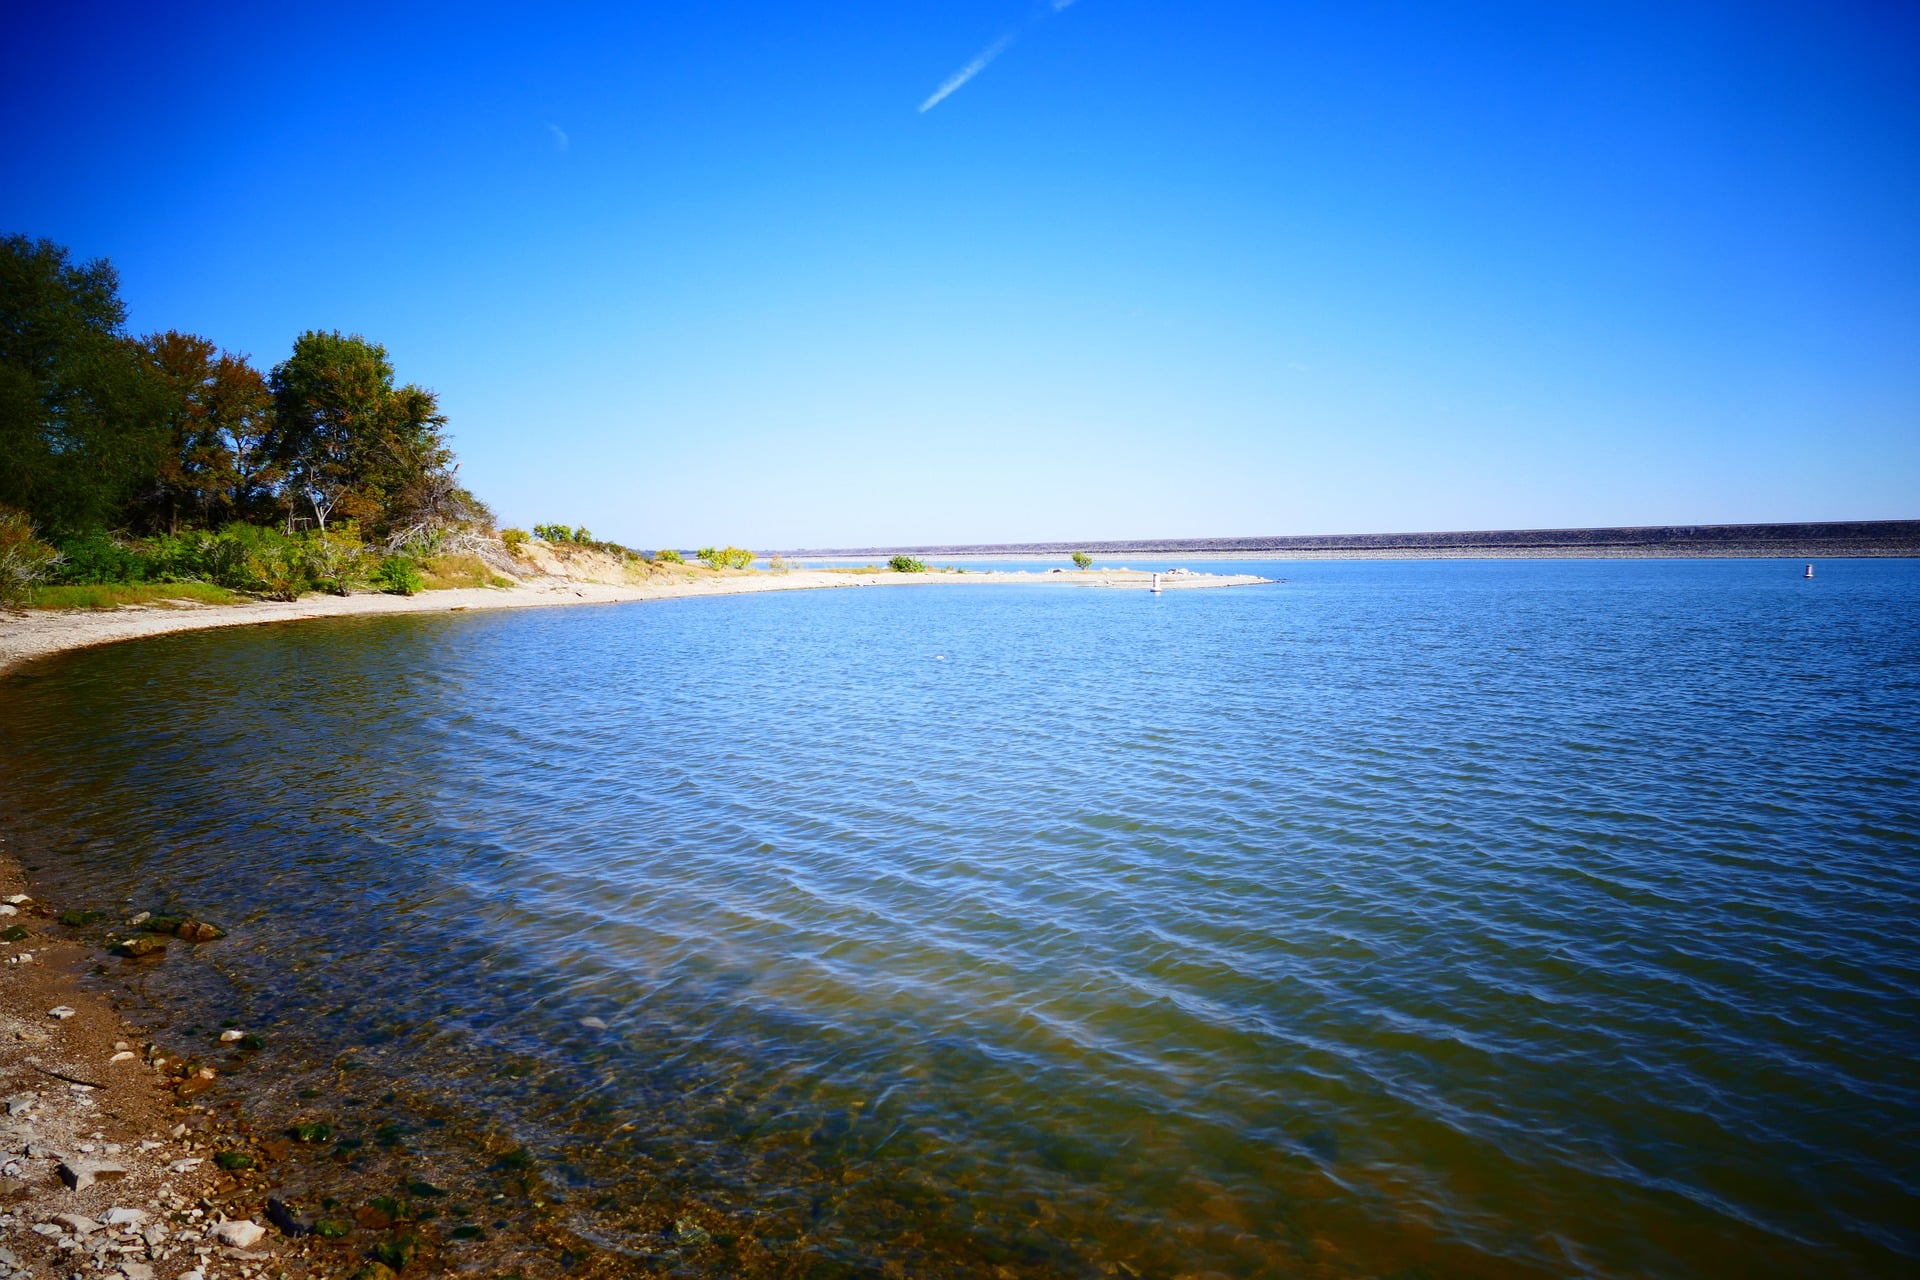 How to Spend Your Day When Visiting Lake Texoma - EZ Dock Texas